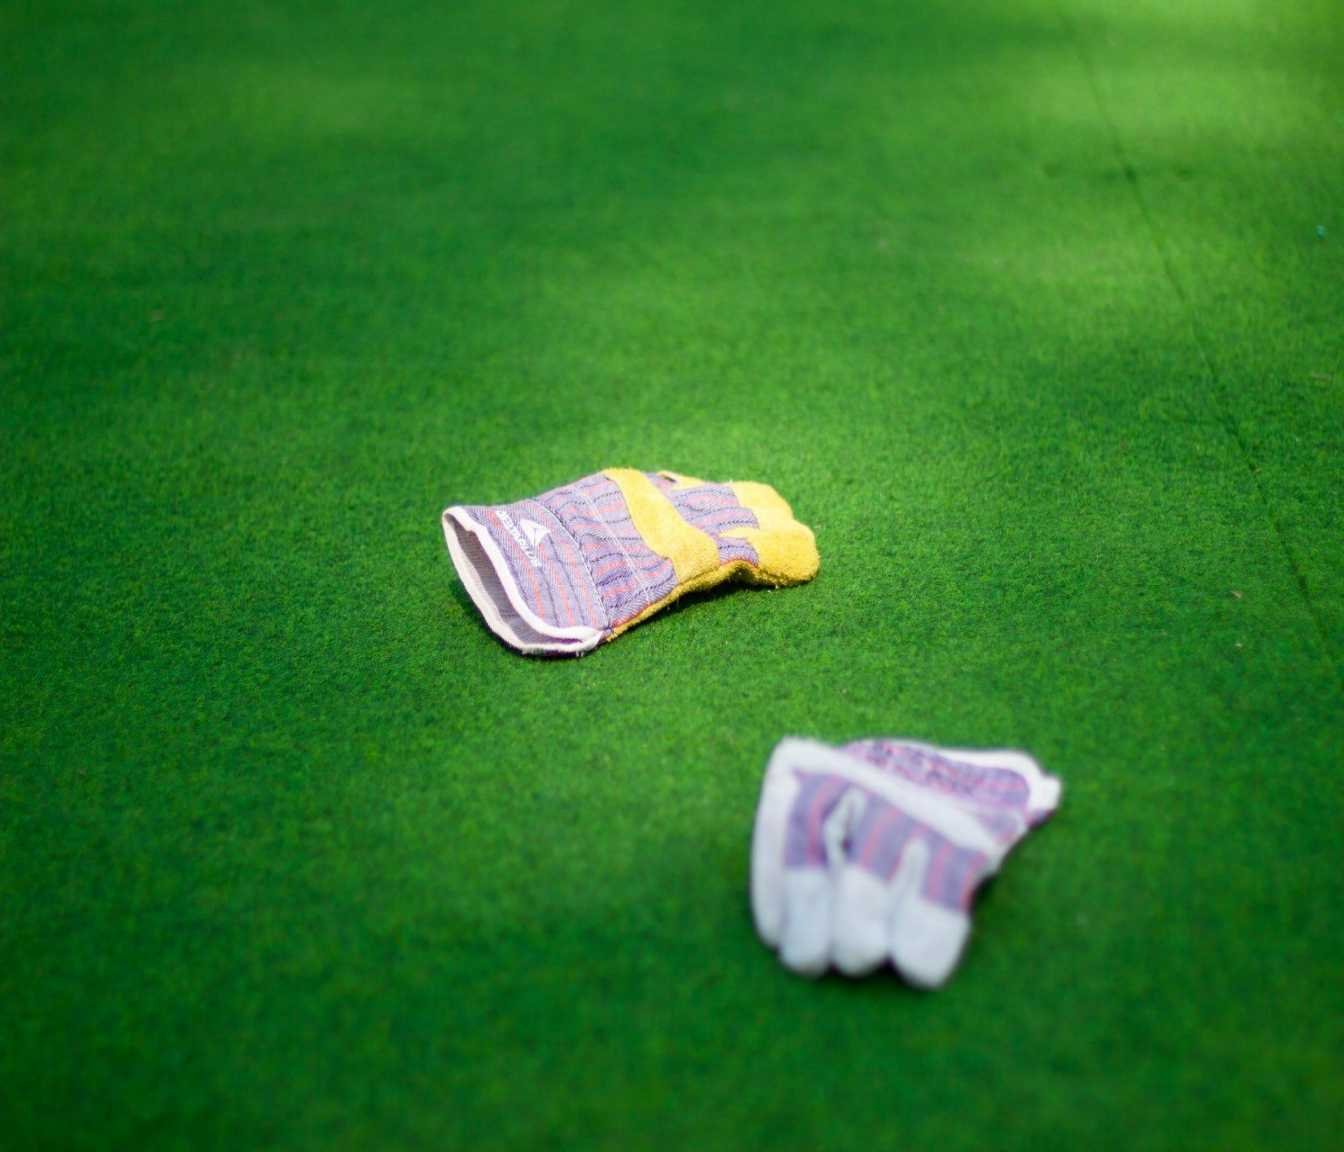 A pair of mismatched work gloves lies on a vibrant green lawn in Maricopa, AZ. One glove is predominantly yellow with pink and purple stripes, while the other glove is white with a similar pink and purple striped pattern. The gloves are positioned a distance apart from each other, perhaps after an athletic turf installation.